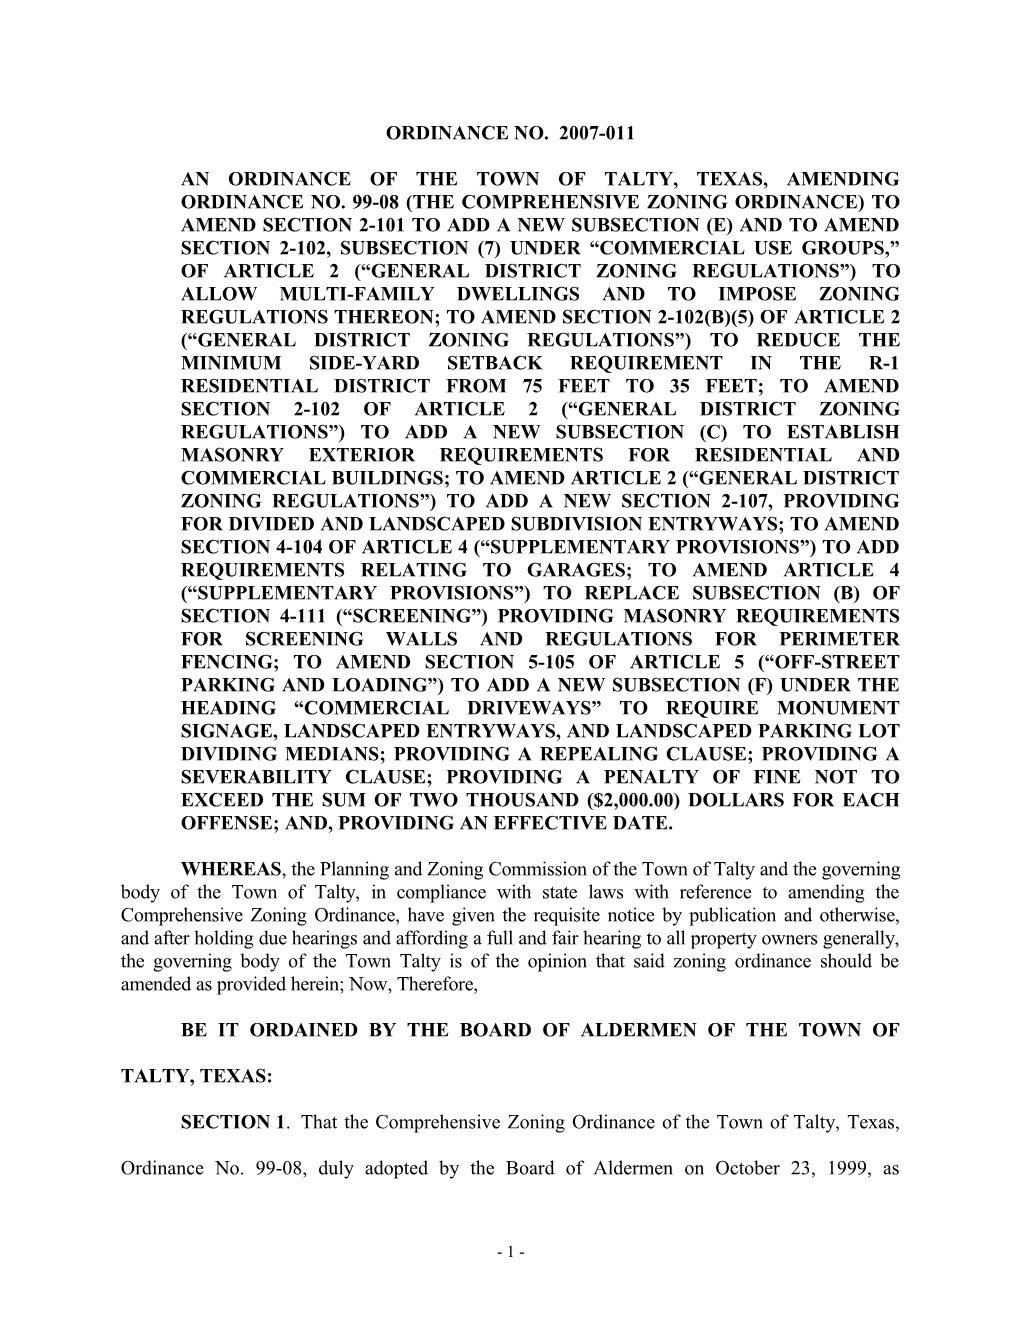 An Ordinance of the Town of Talty, Texas, Amending Ordinance No. 99-08 (The Comprehensive